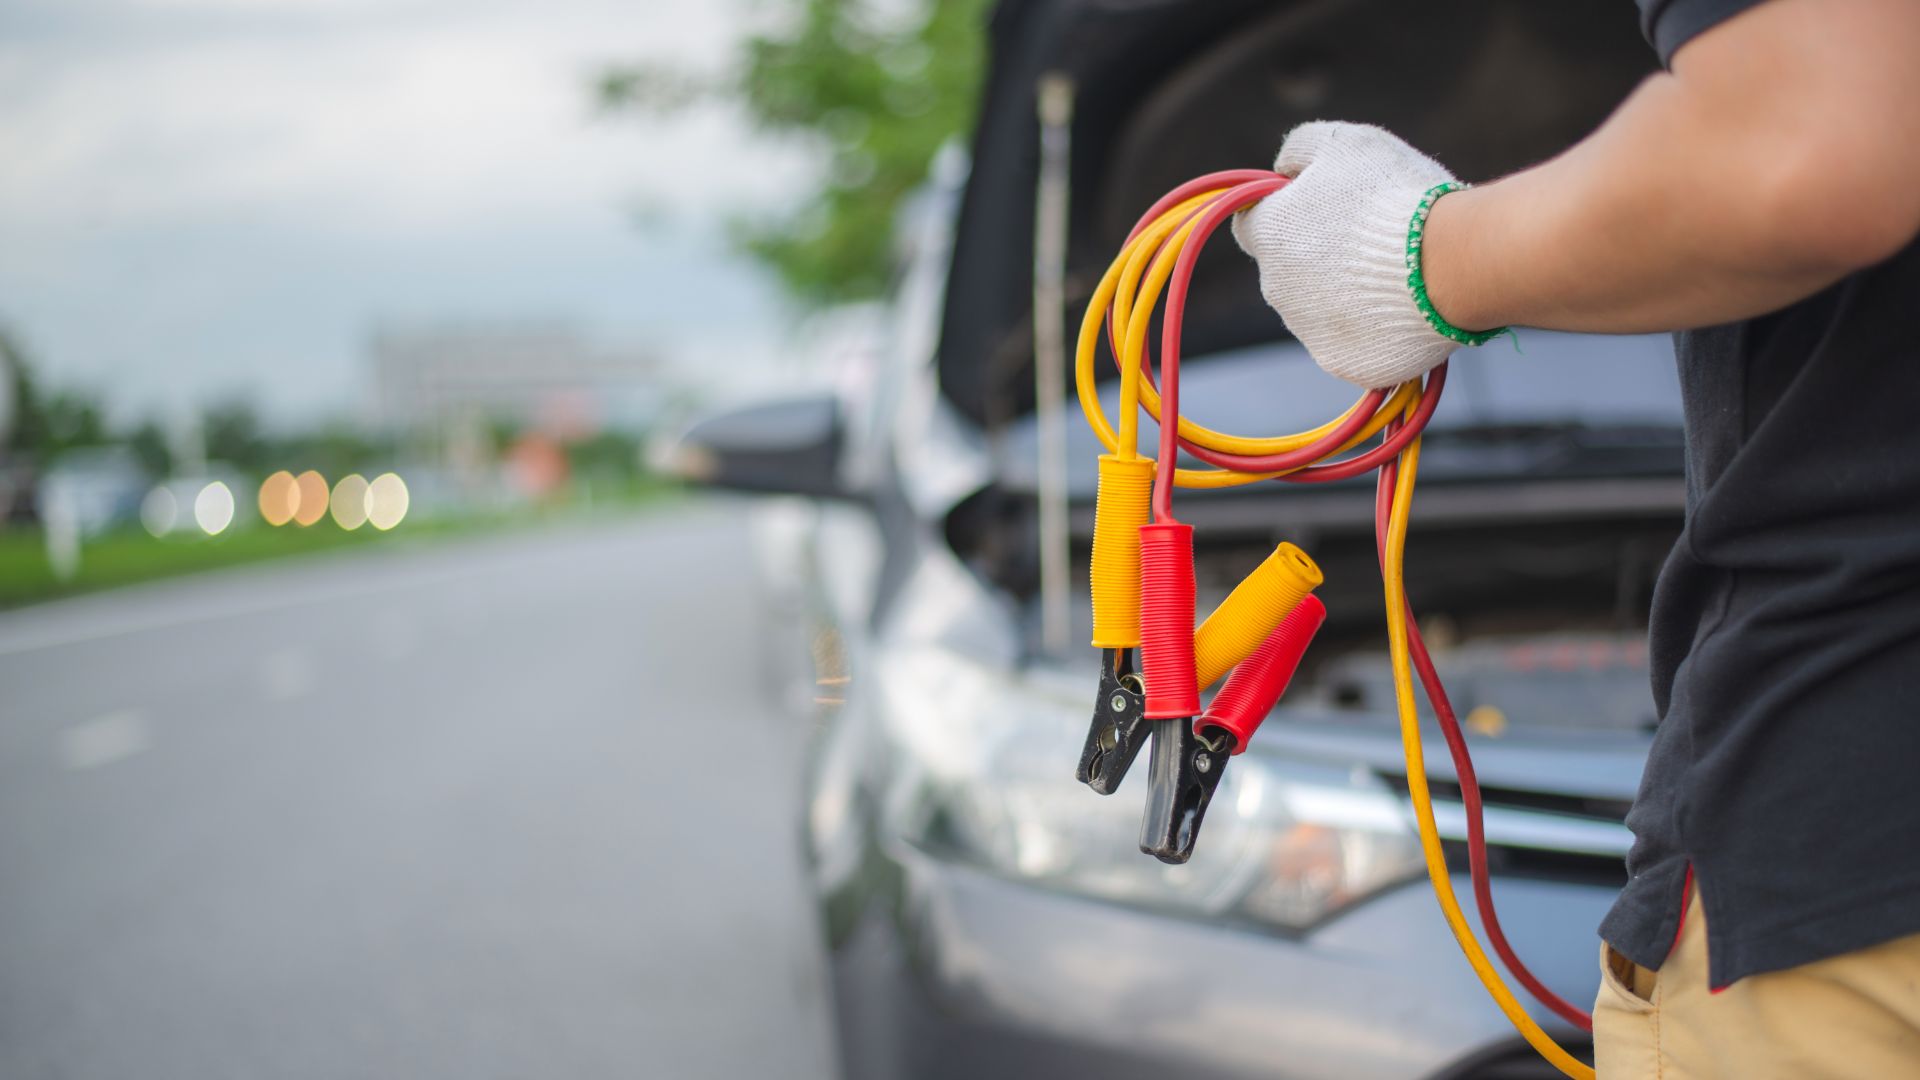 a man is holding a jump rope in front of a car.